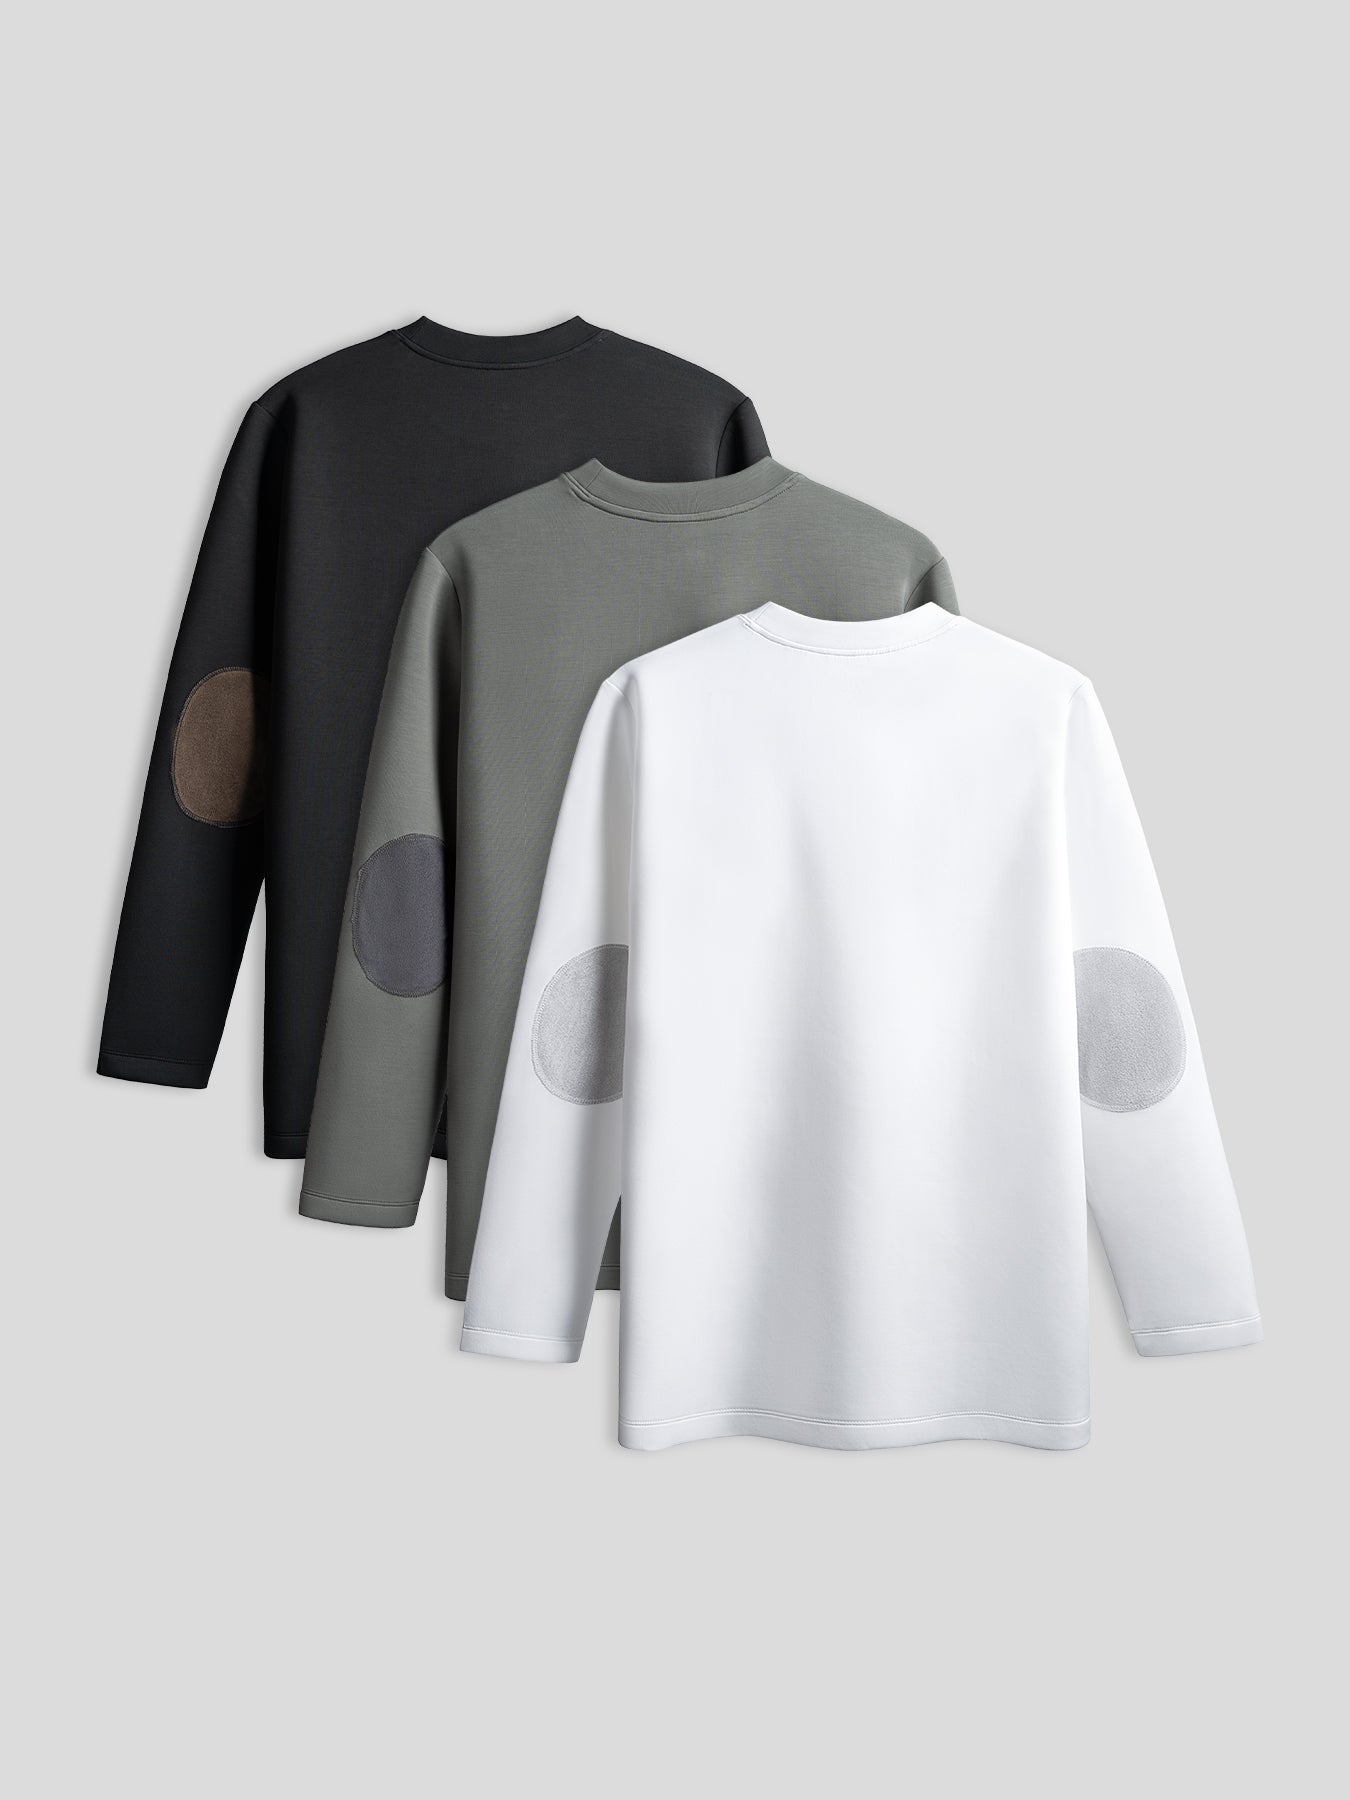 Modal Blend Elbow Patch Long Sleeve Multicolor Tee 3-Pack